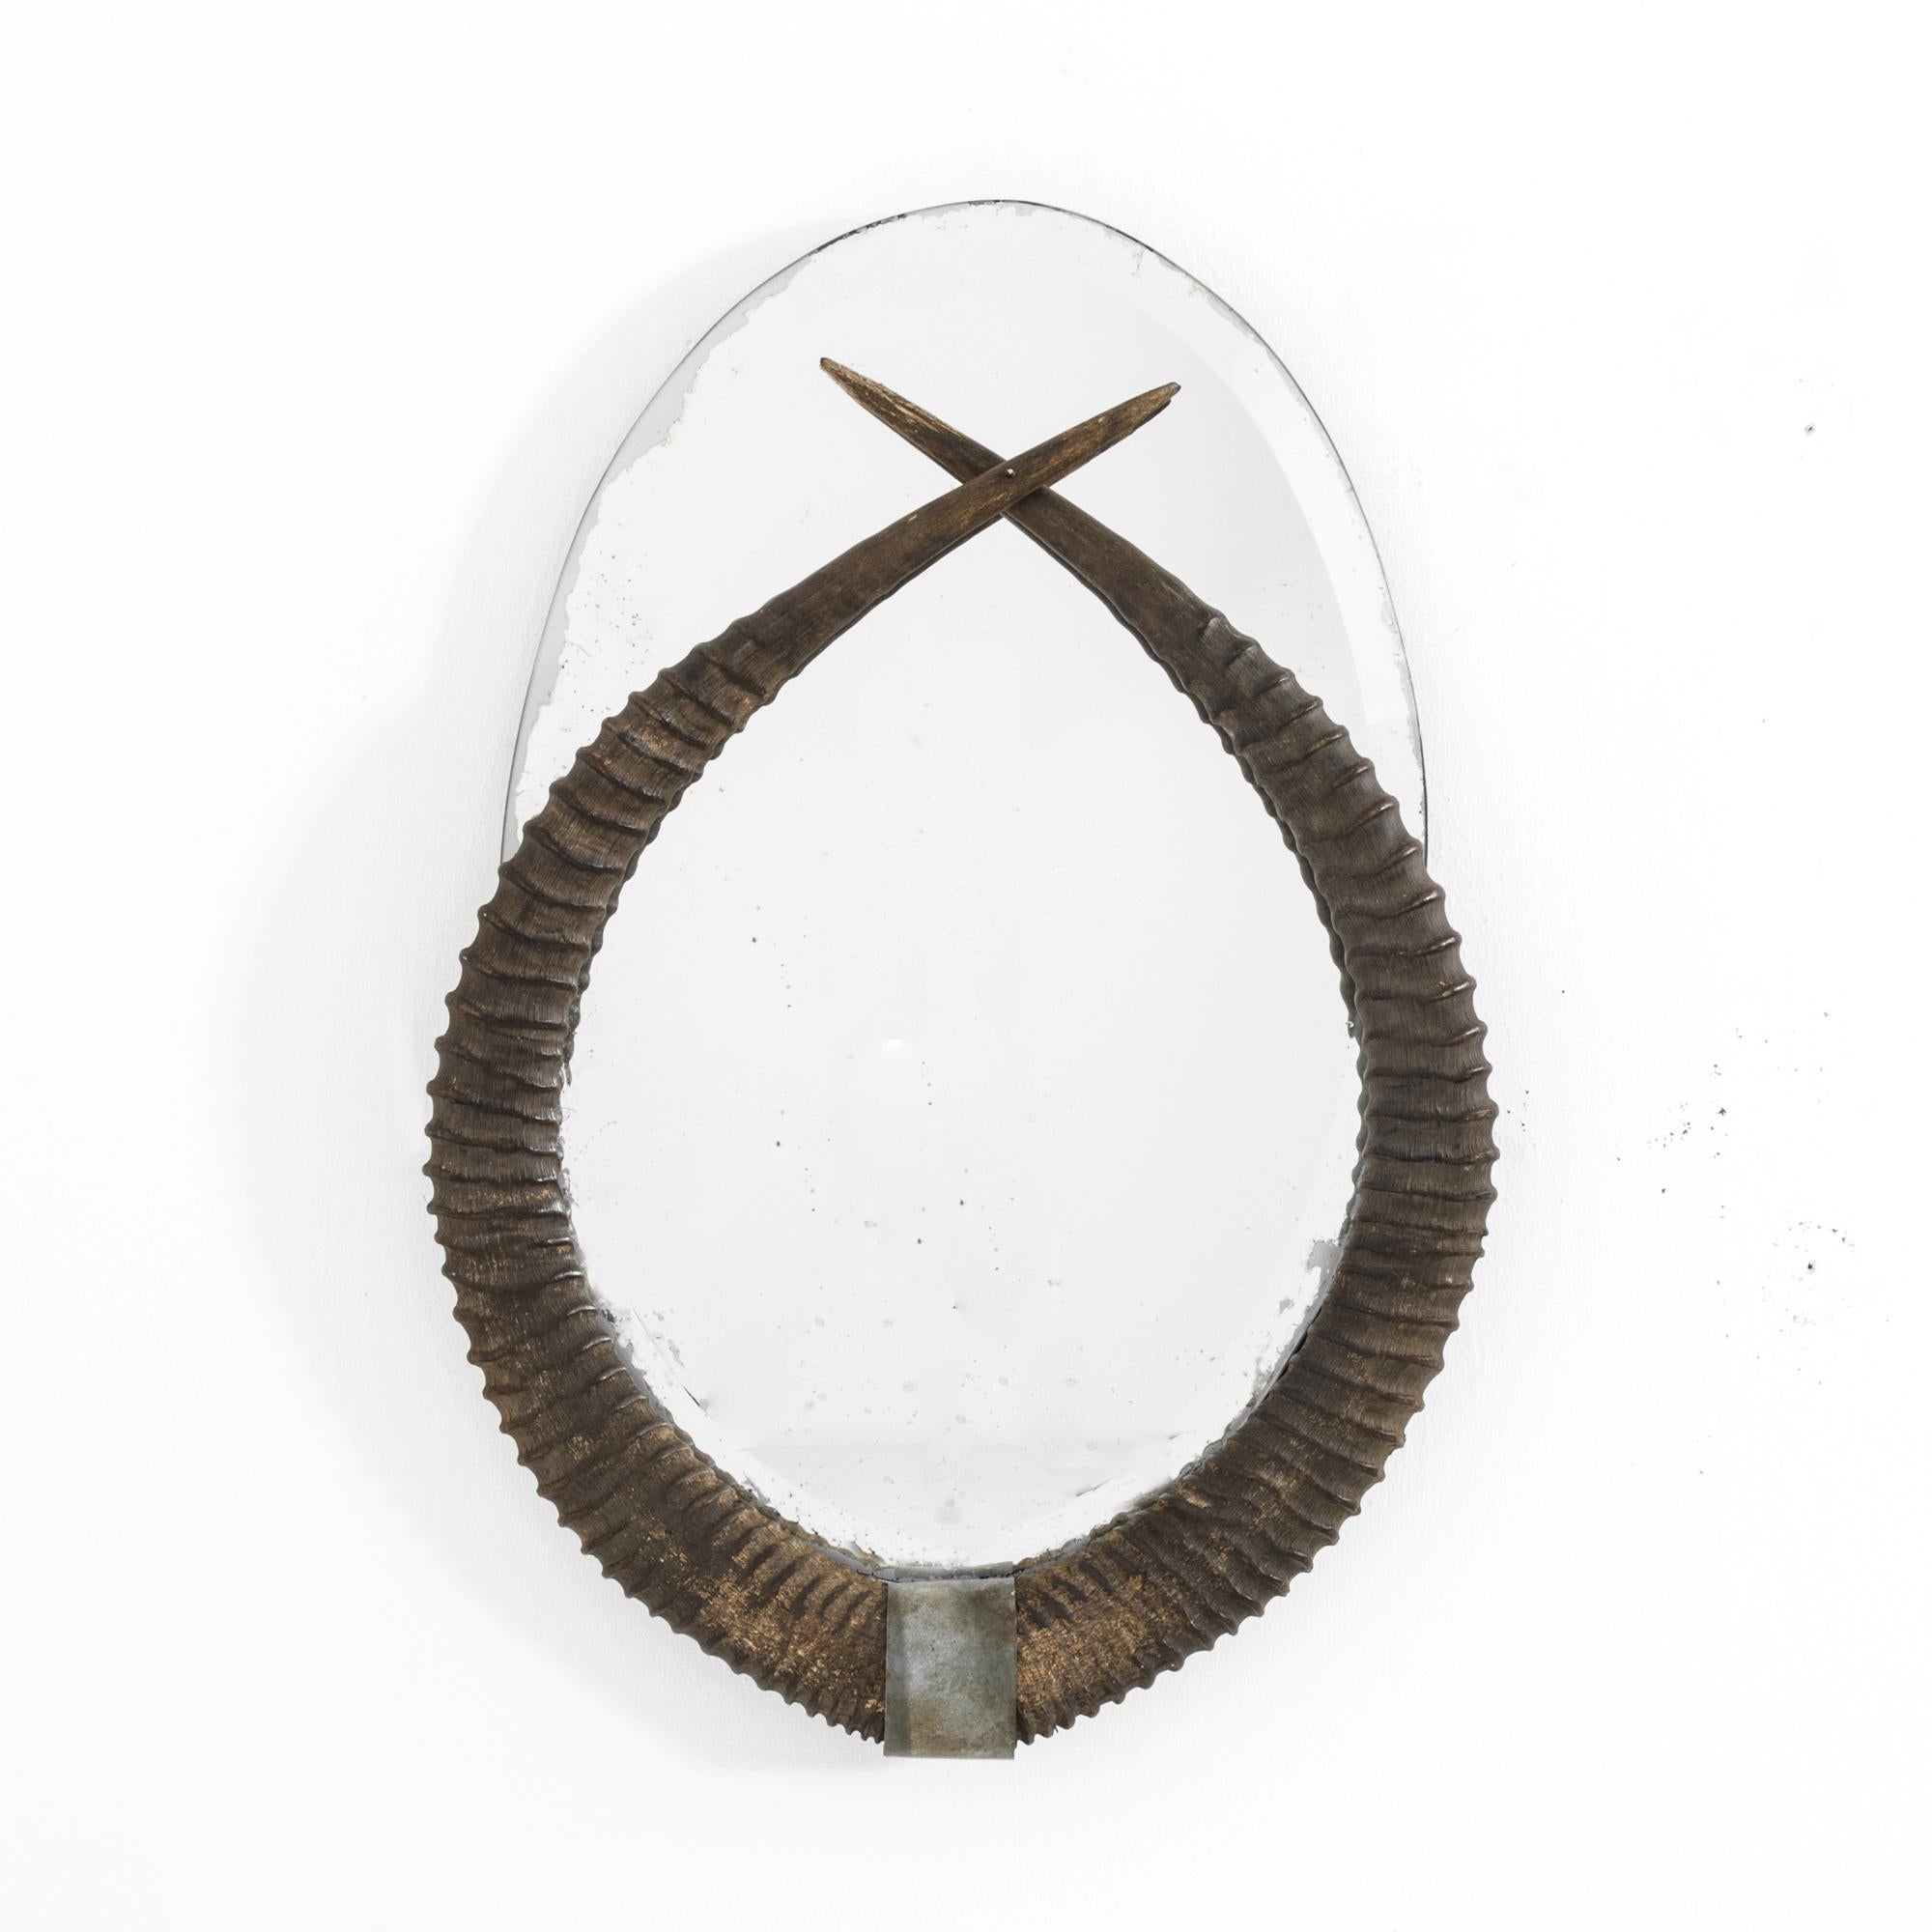 A decorative wooden mirror from Belgium, produced in the 1920s. Much like the masks of Picasso, this piece was inspired by contacts with other cultures. Its early modern design combines the clean look of a frameless mirror with the organic curves of